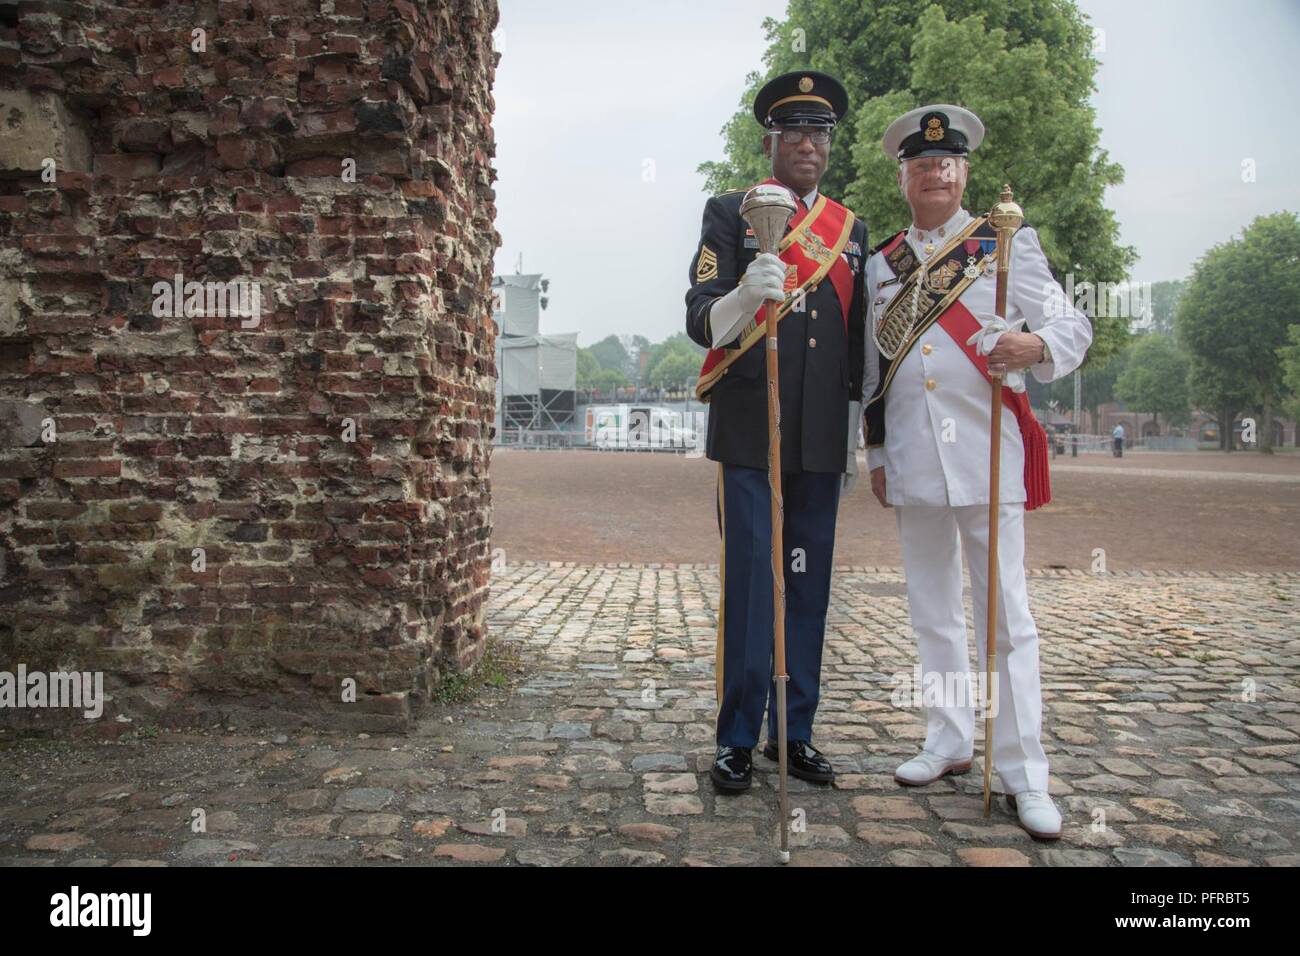 US drum major SGM Jesse L. Hughes Jr. stands alongside Major Hans Moreels of the German Heeresmusikorps during the Citadelle 350 anniversary military show, May 25, 2018, Lille, France.  US Army Stock Photo